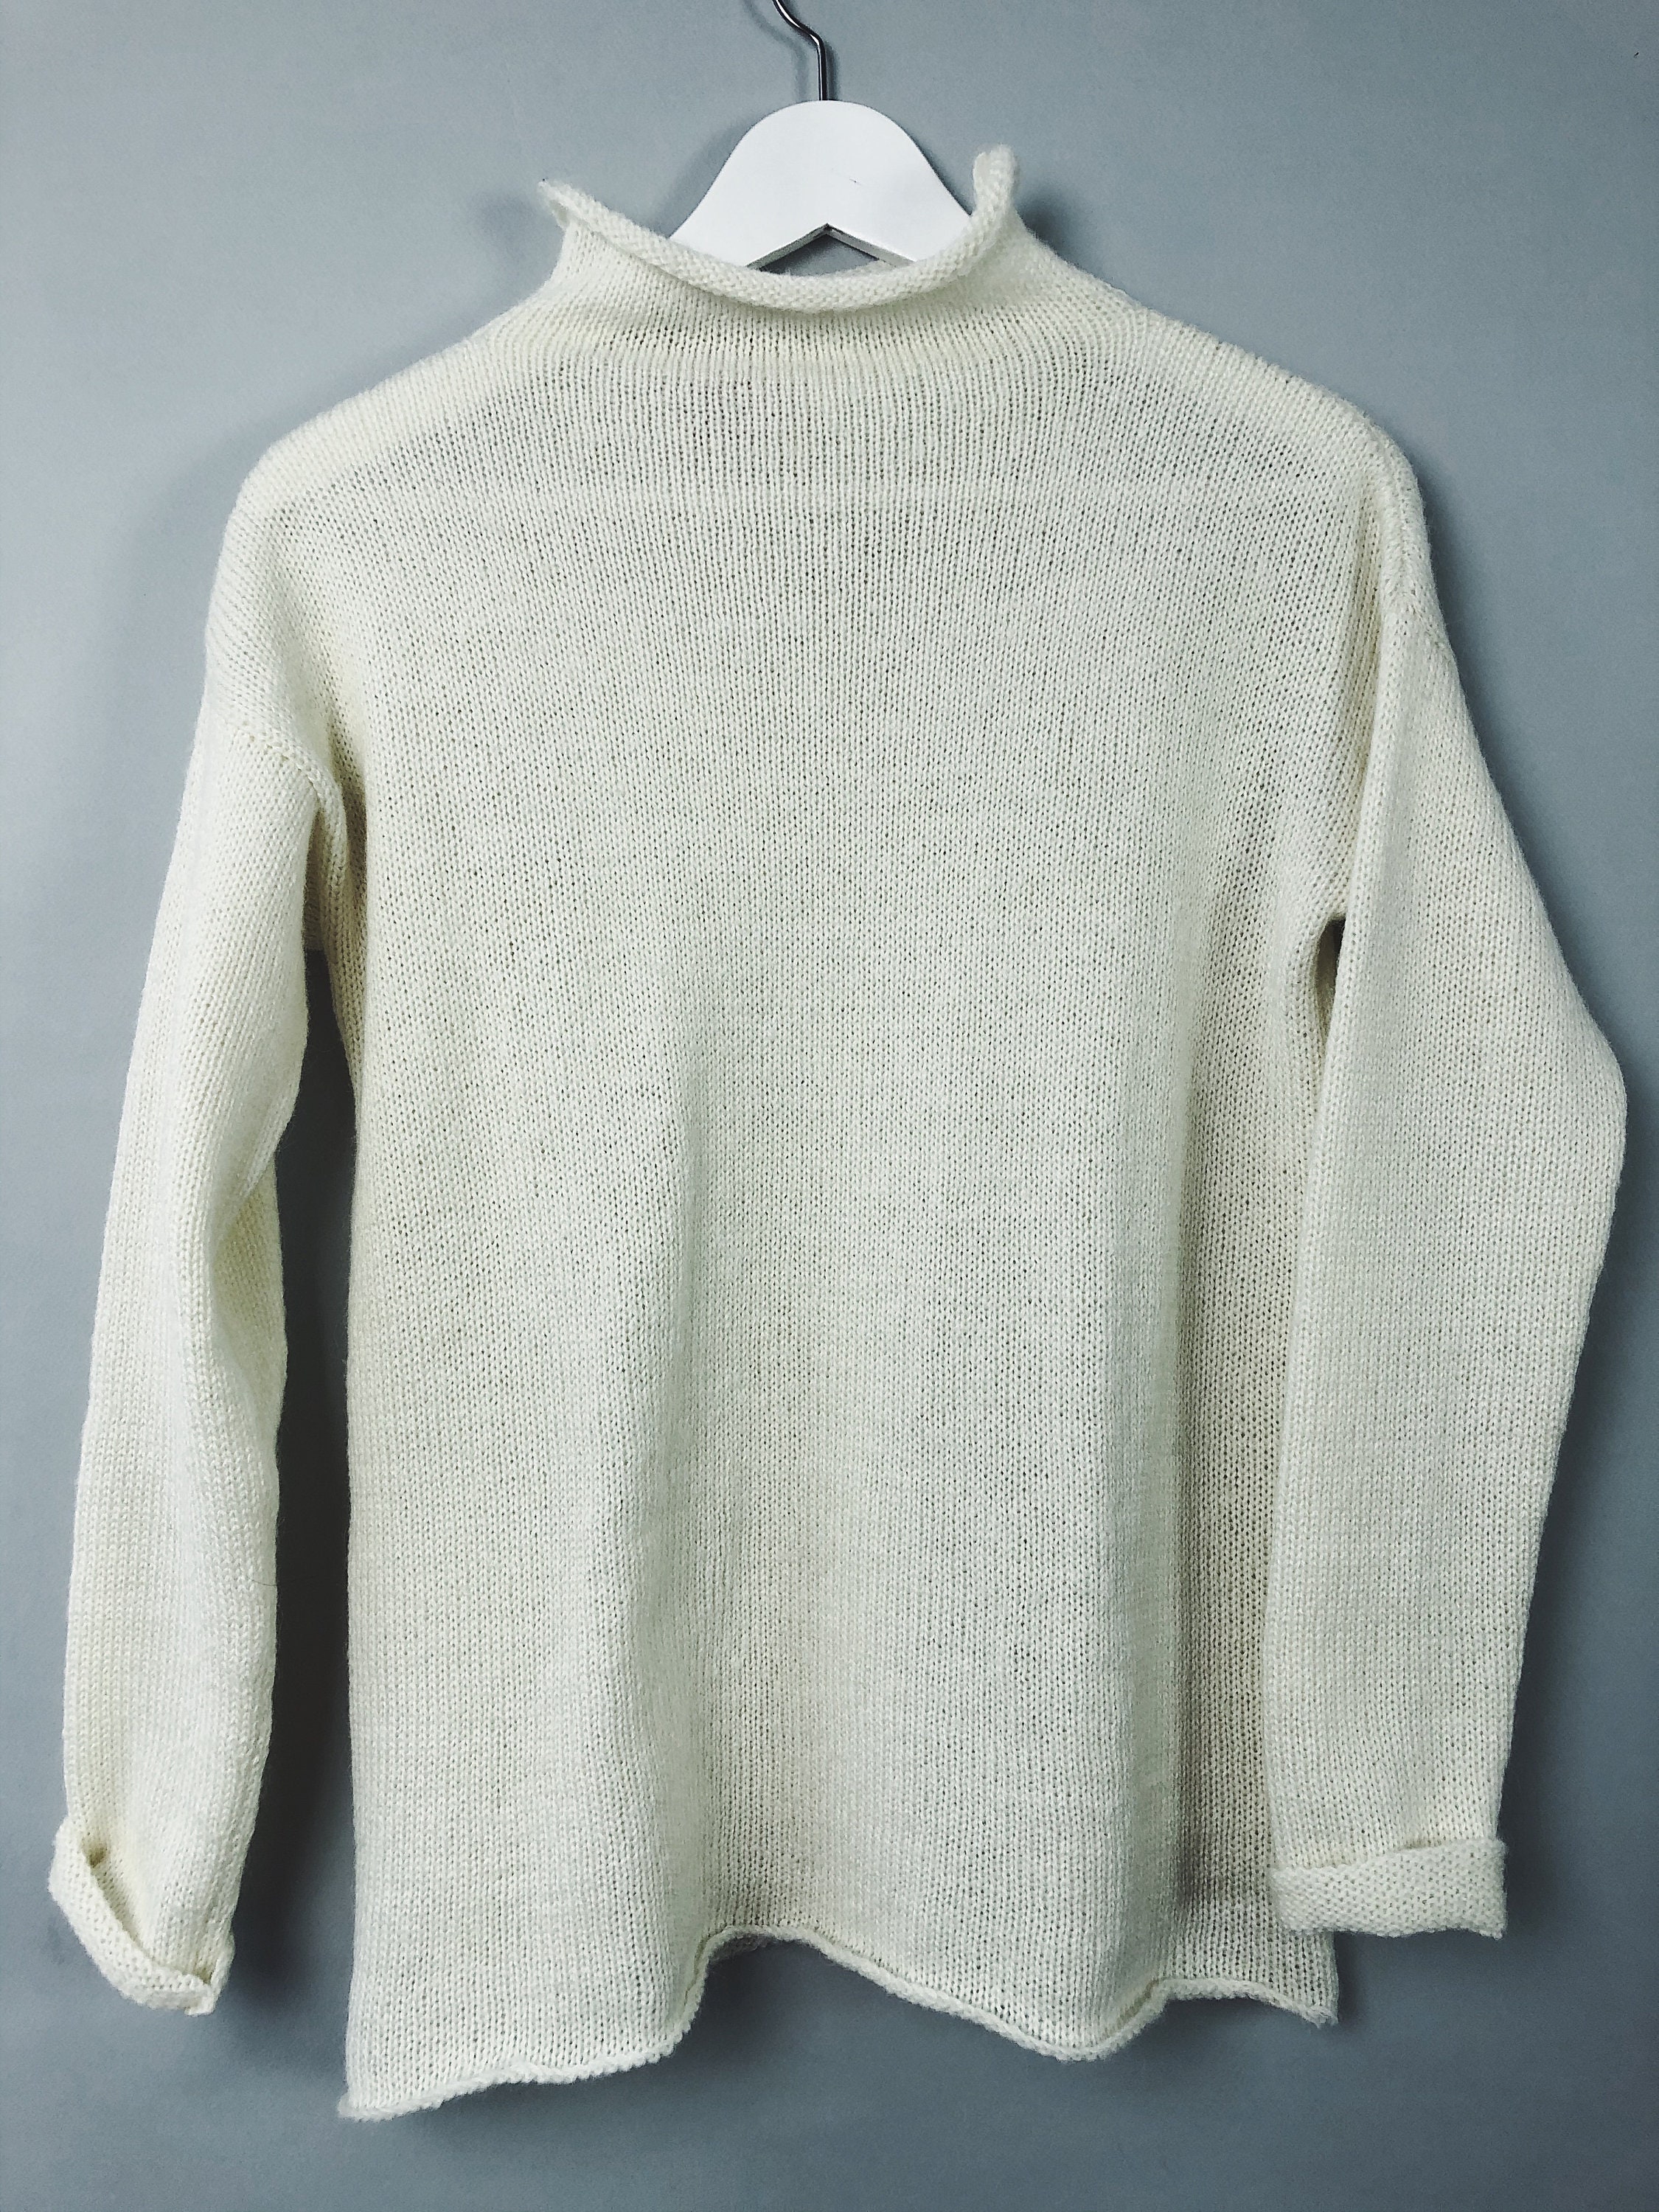 Cashmere Sweater Oversized Very Light Warm and Fluffy / Women - Etsy